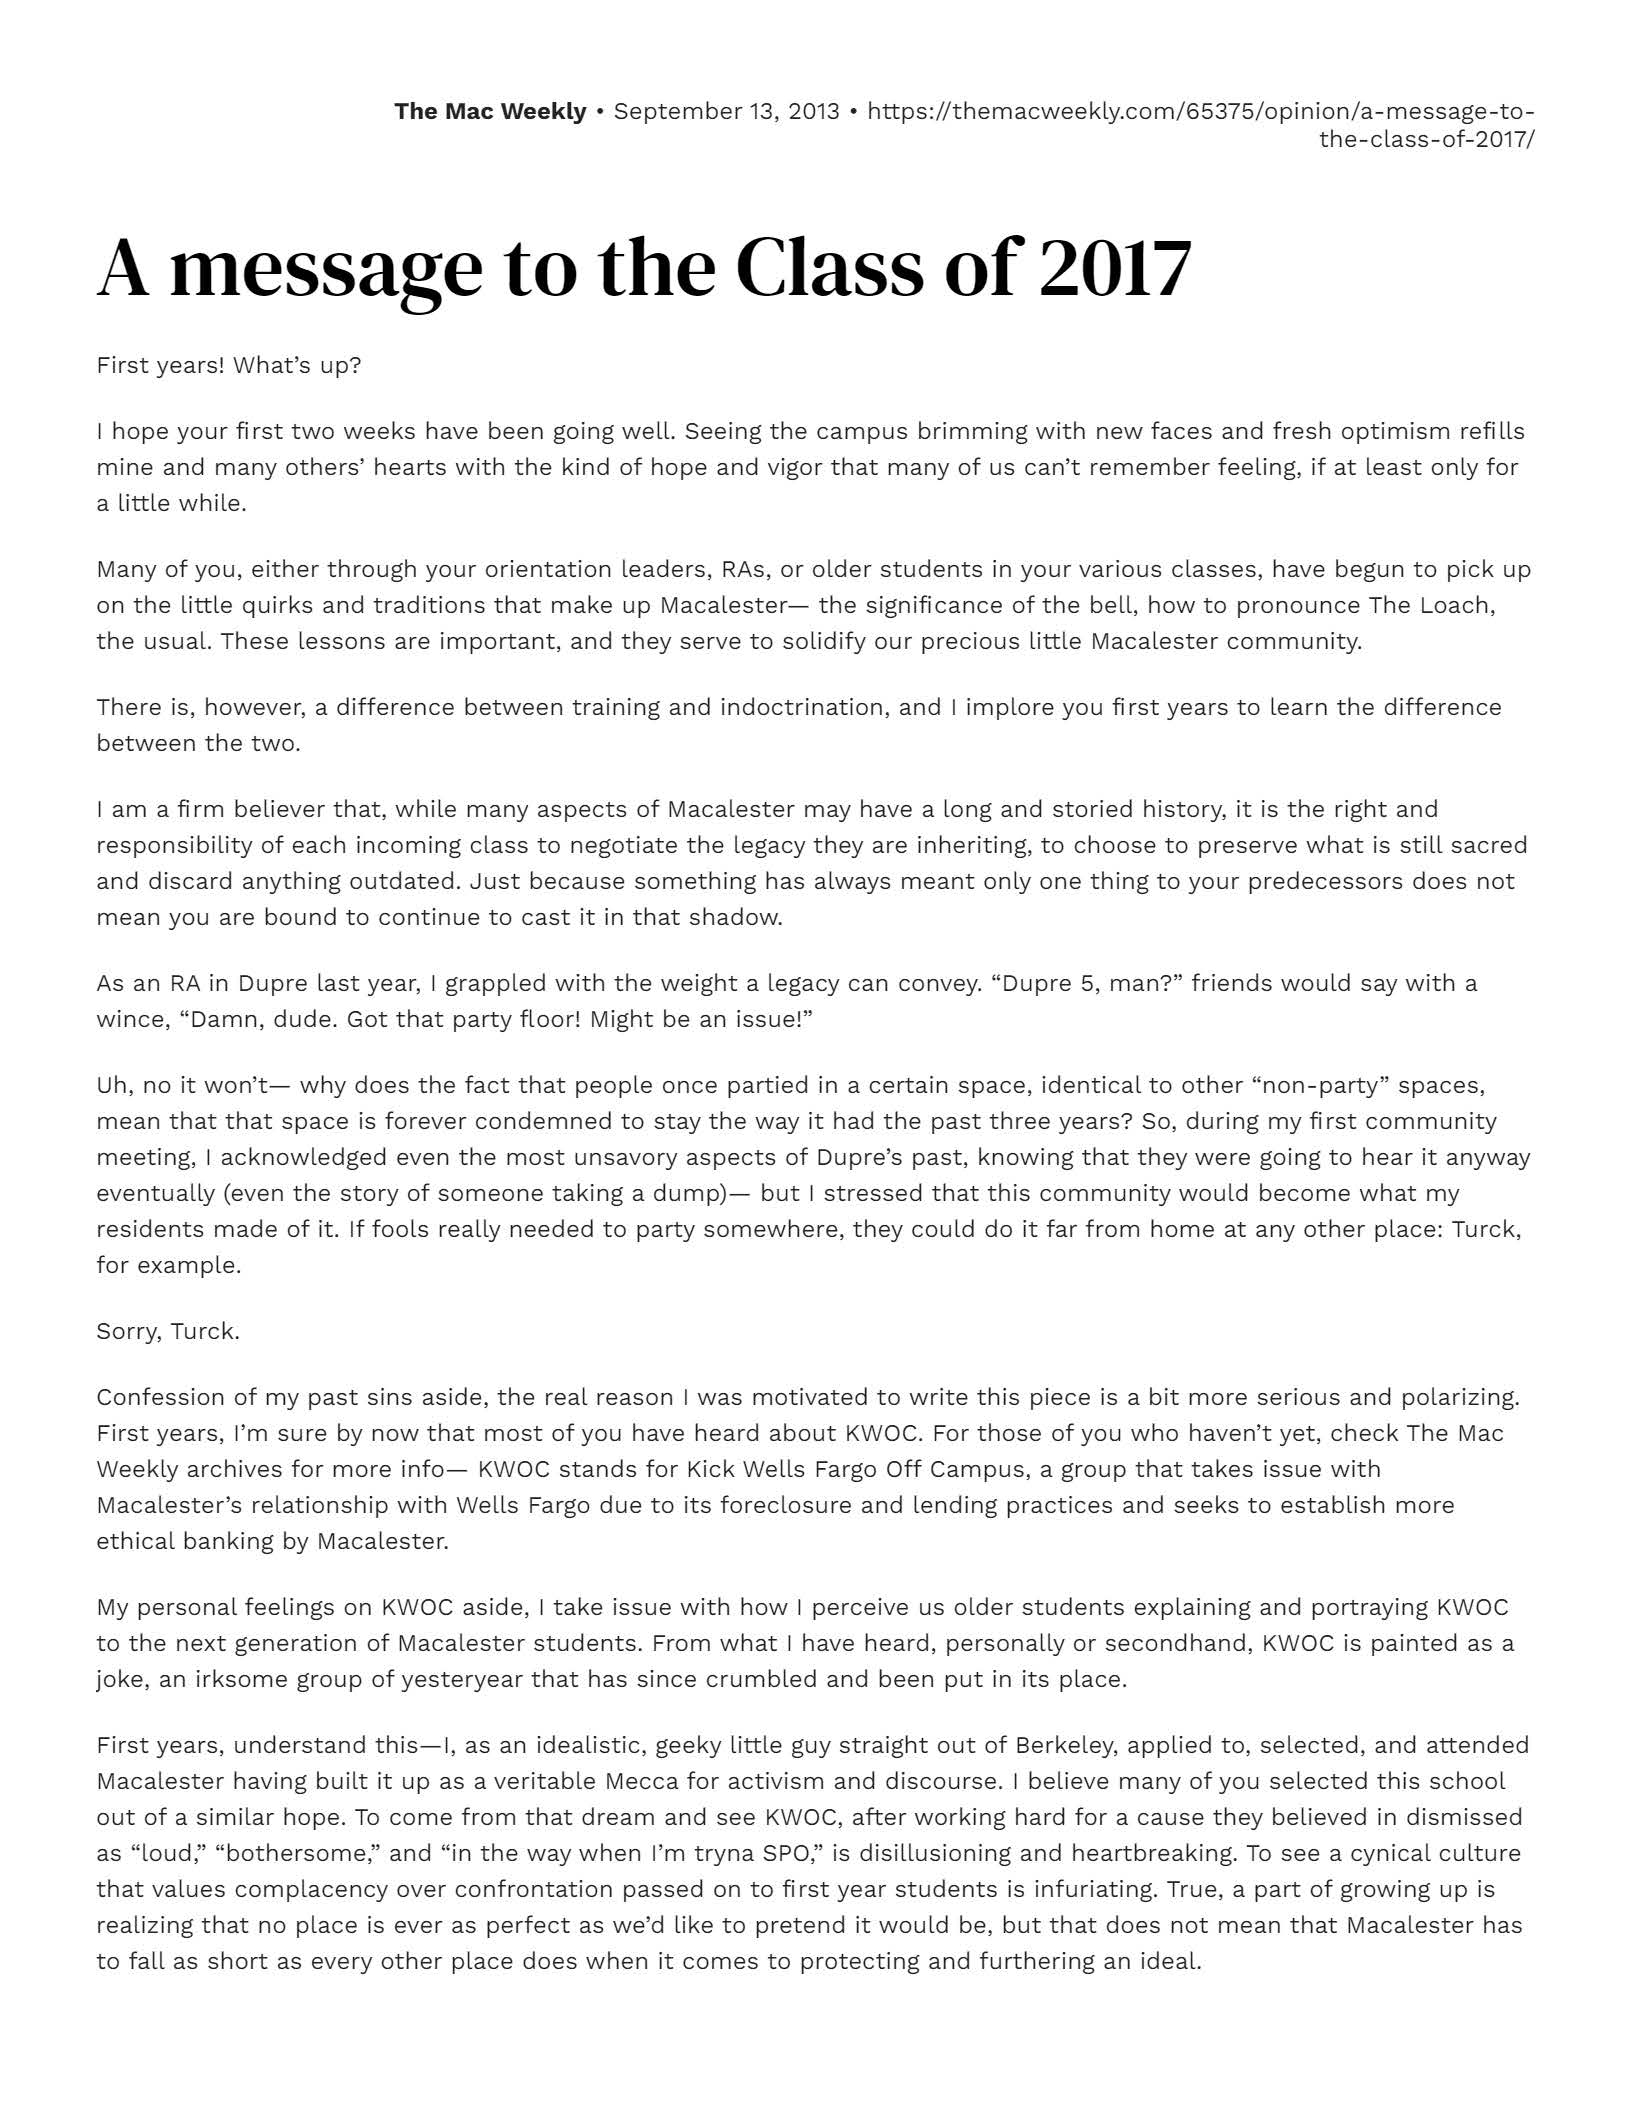 The Mac Weekly, September 13, 2013. A message to the Class of 2017.